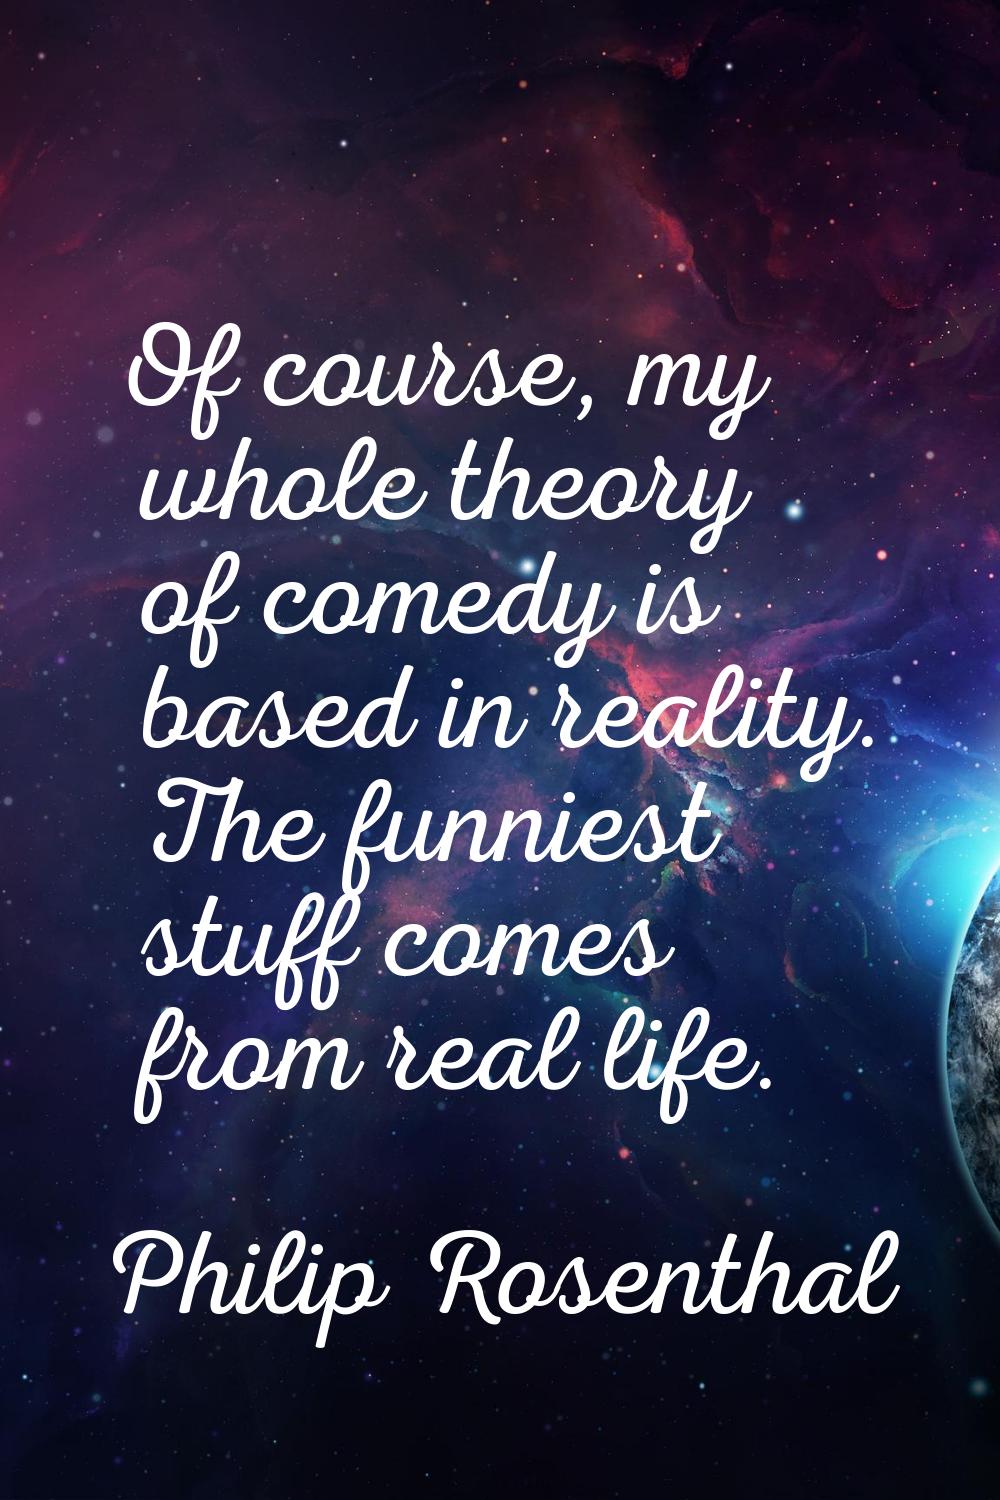 Of course, my whole theory of comedy is based in reality. The funniest stuff comes from real life.